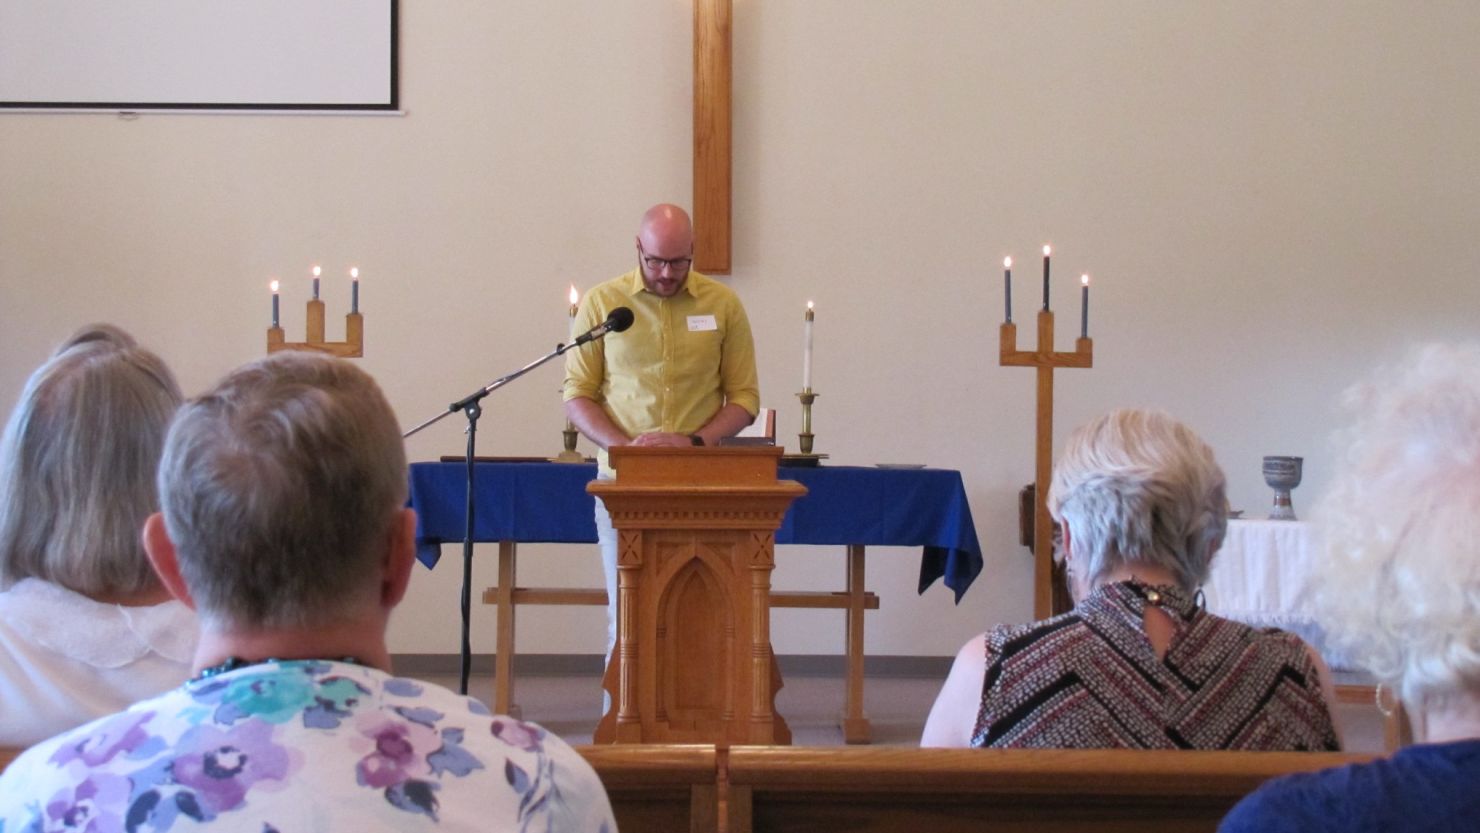 Grove United Methodist Church in Cottage Grove, Minnesota, is temporarily closing in June with plans to relaunch later in the year. Church leaders say the move is intended to attract new members.